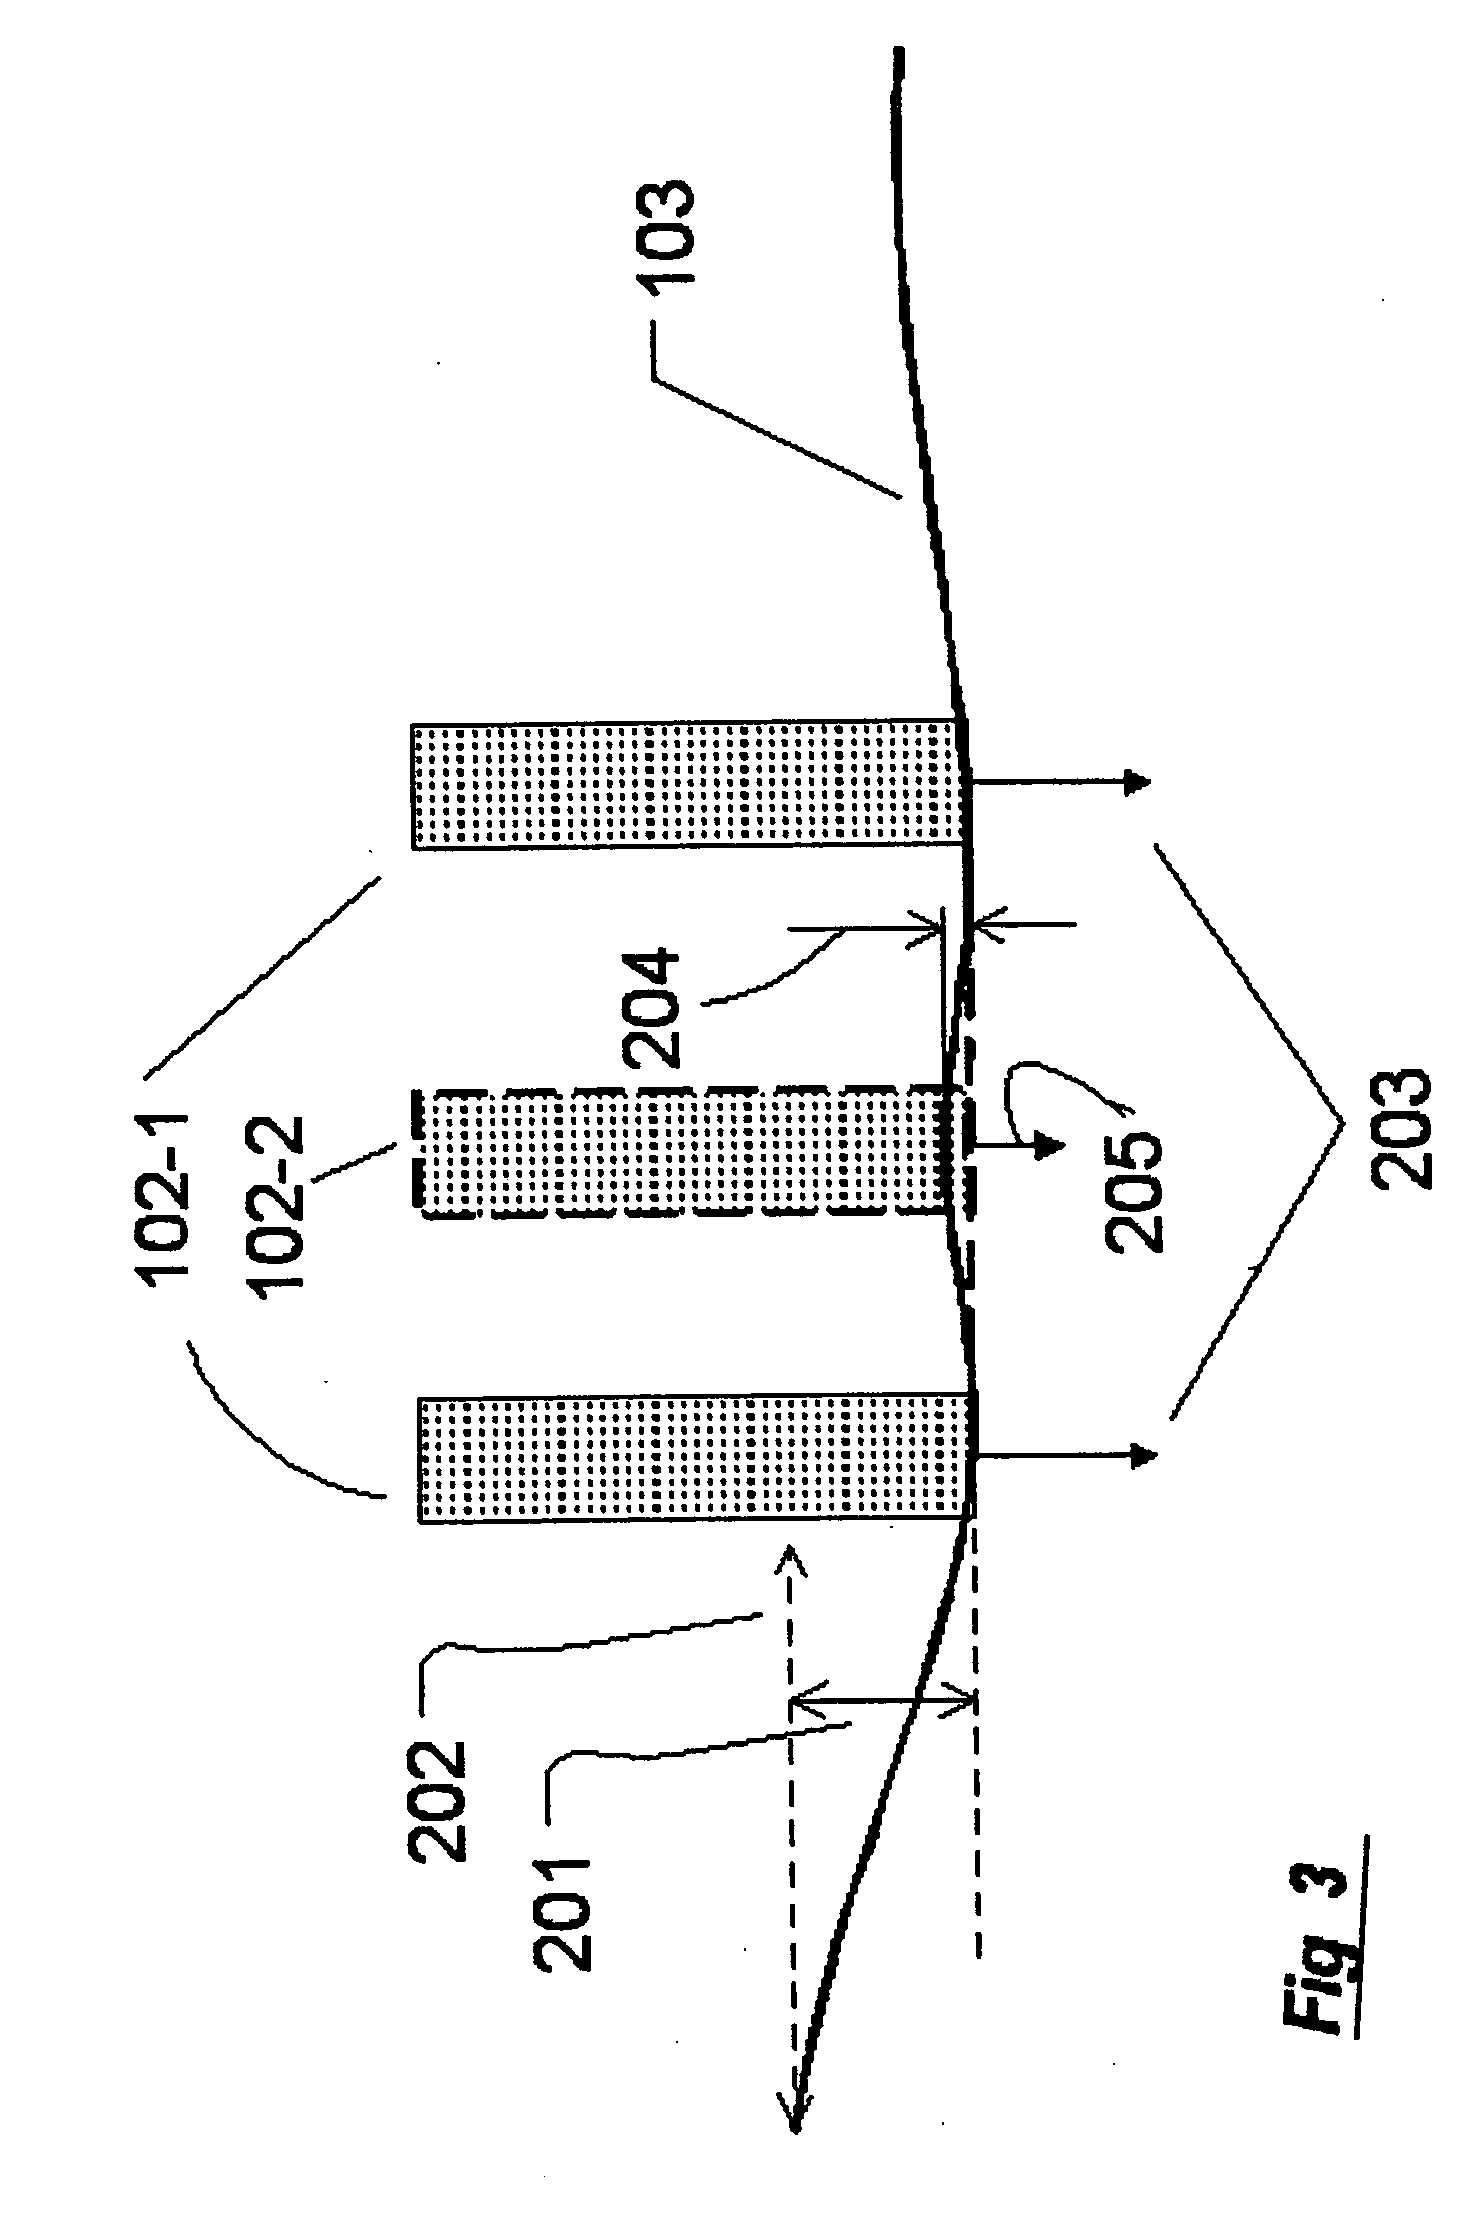 Adapter for multi-element contact-probe